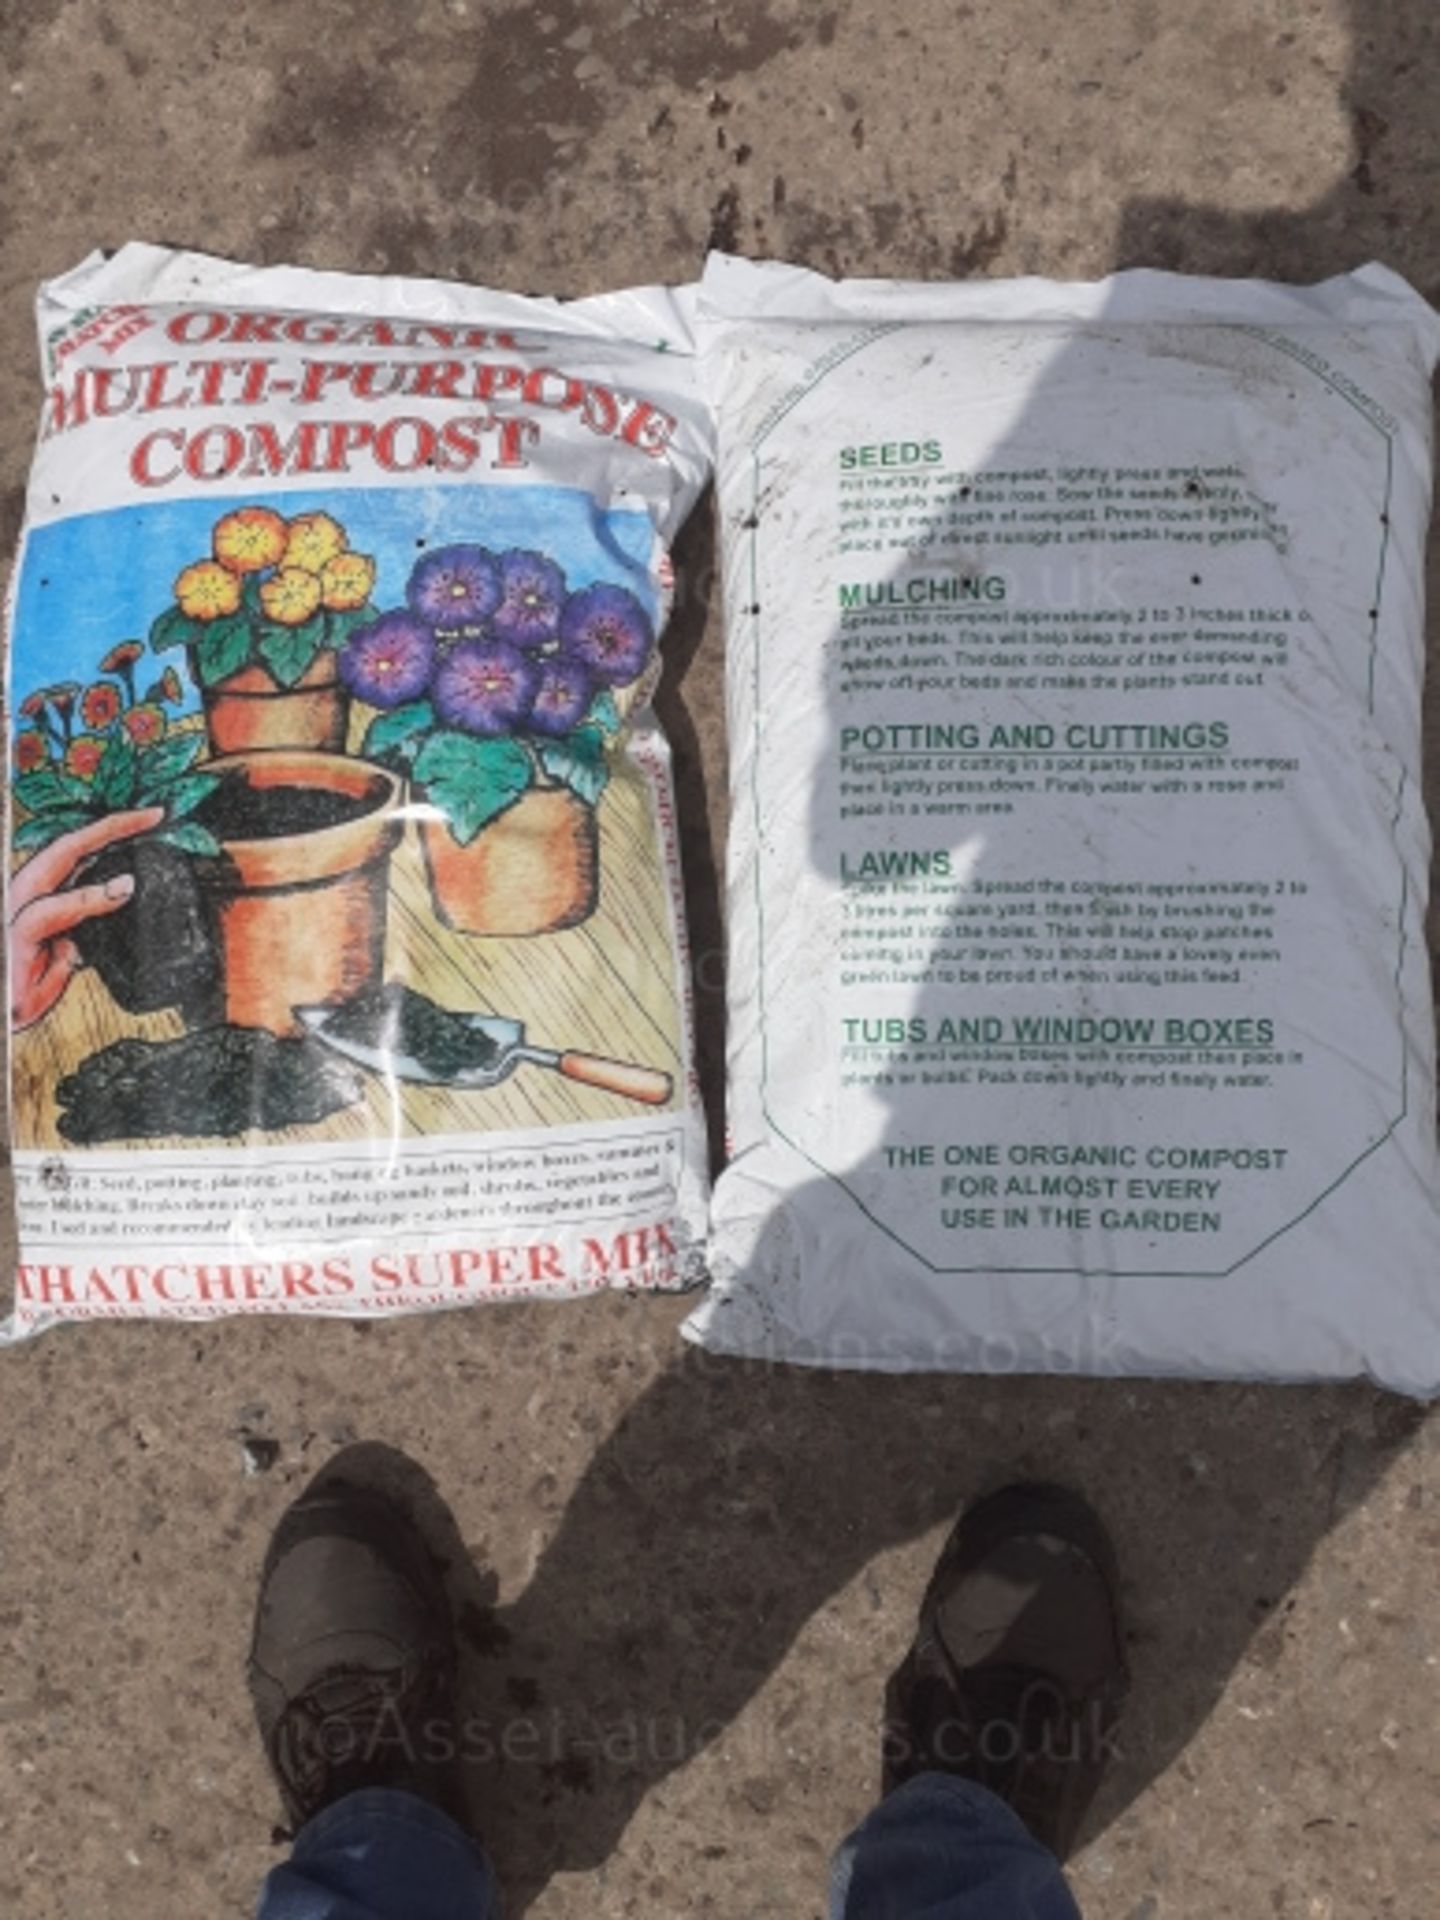 1 PALLET OF TOP GRADE COMPOST, EACH BAG CONTAINS 40 LITRES, 75 BAGS PER PALLET, APPROX WEIGHT 800kg - Image 3 of 5